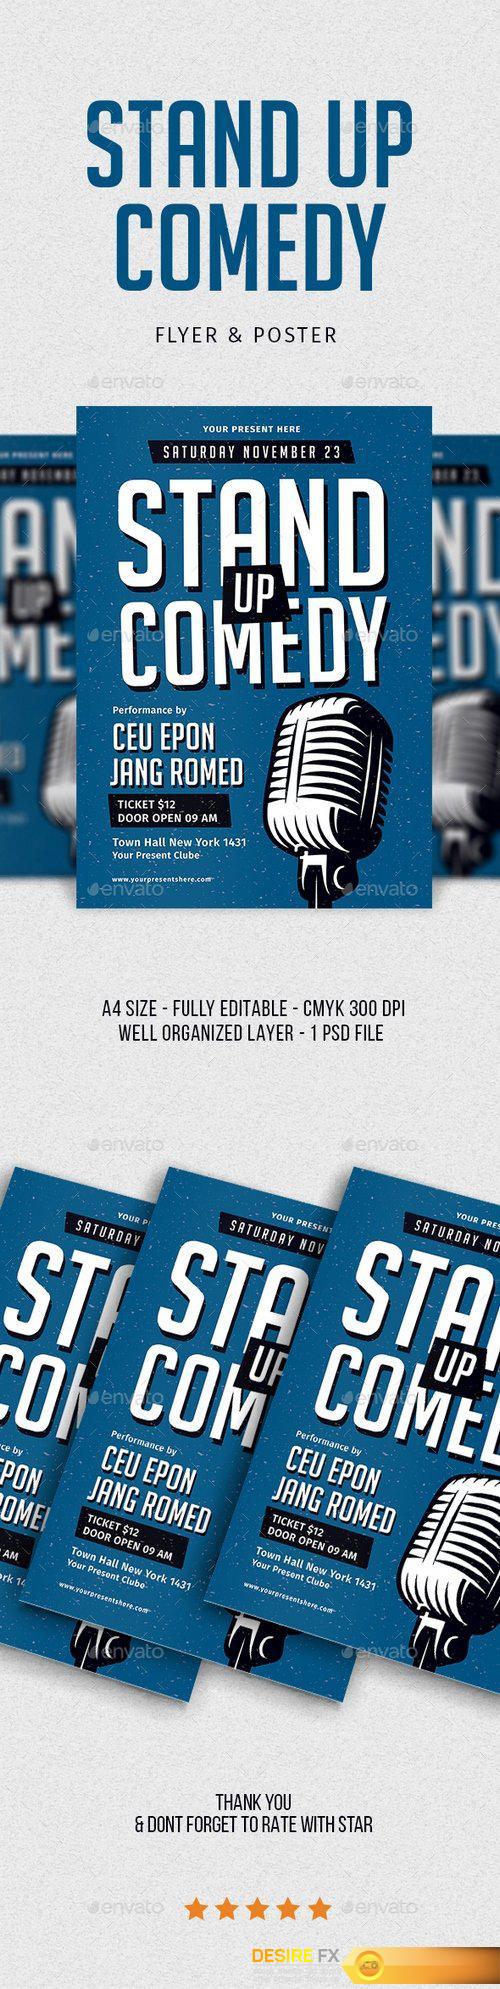 Graphicriver - Stand Up Comedy Flyer 20927674